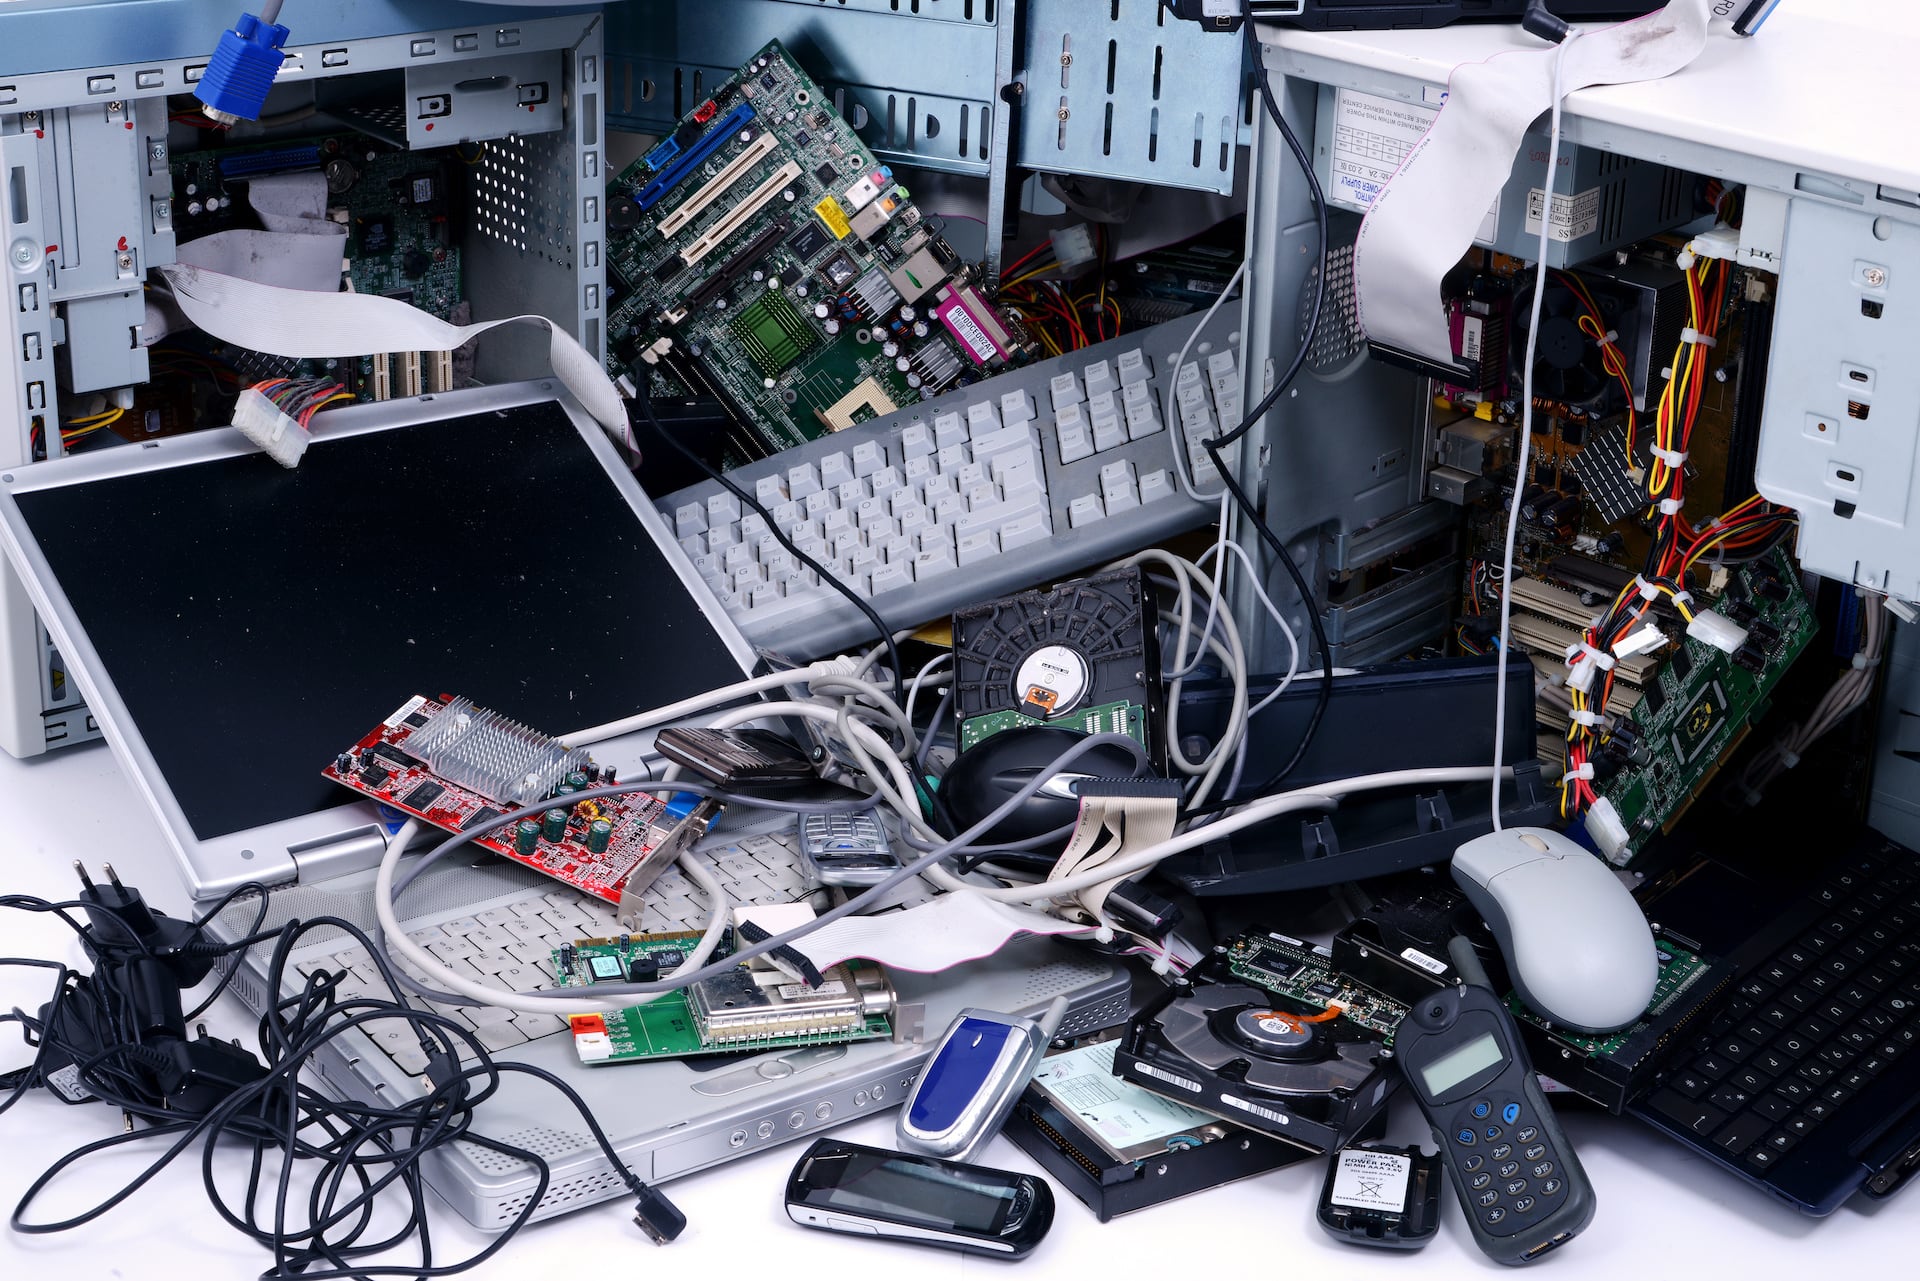 E-waste disposal for used electronic devices